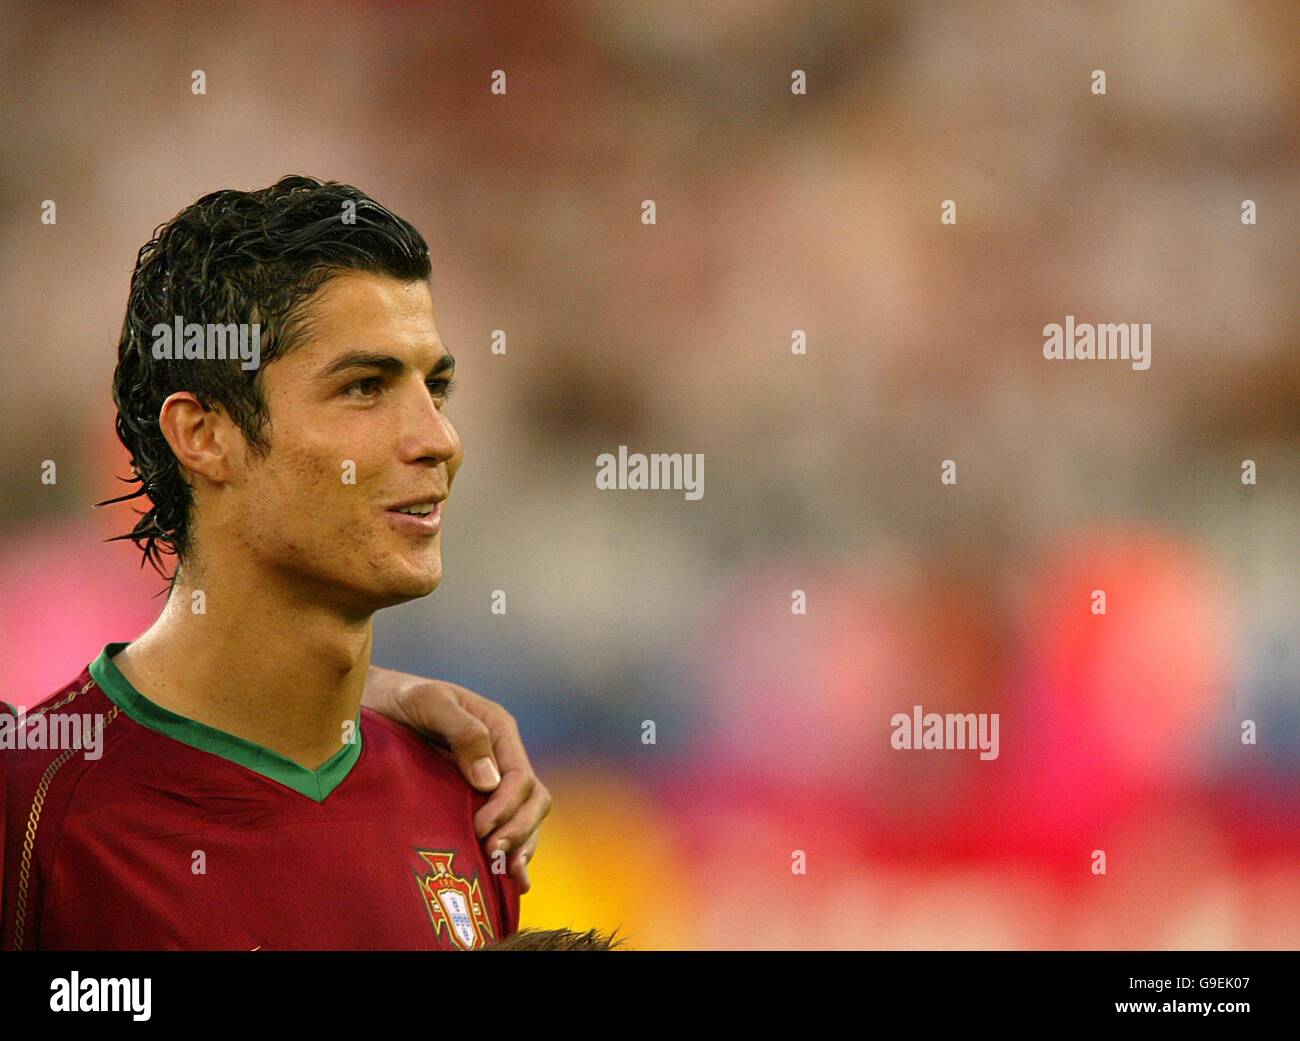 Soccer - 2006 FIFA World Cup Germany - Third Place Play-Off - Germany v Portugal - Gottlieb-Daimler-Stadion. Cristiano Ronaldo, Portugal Stock Photo